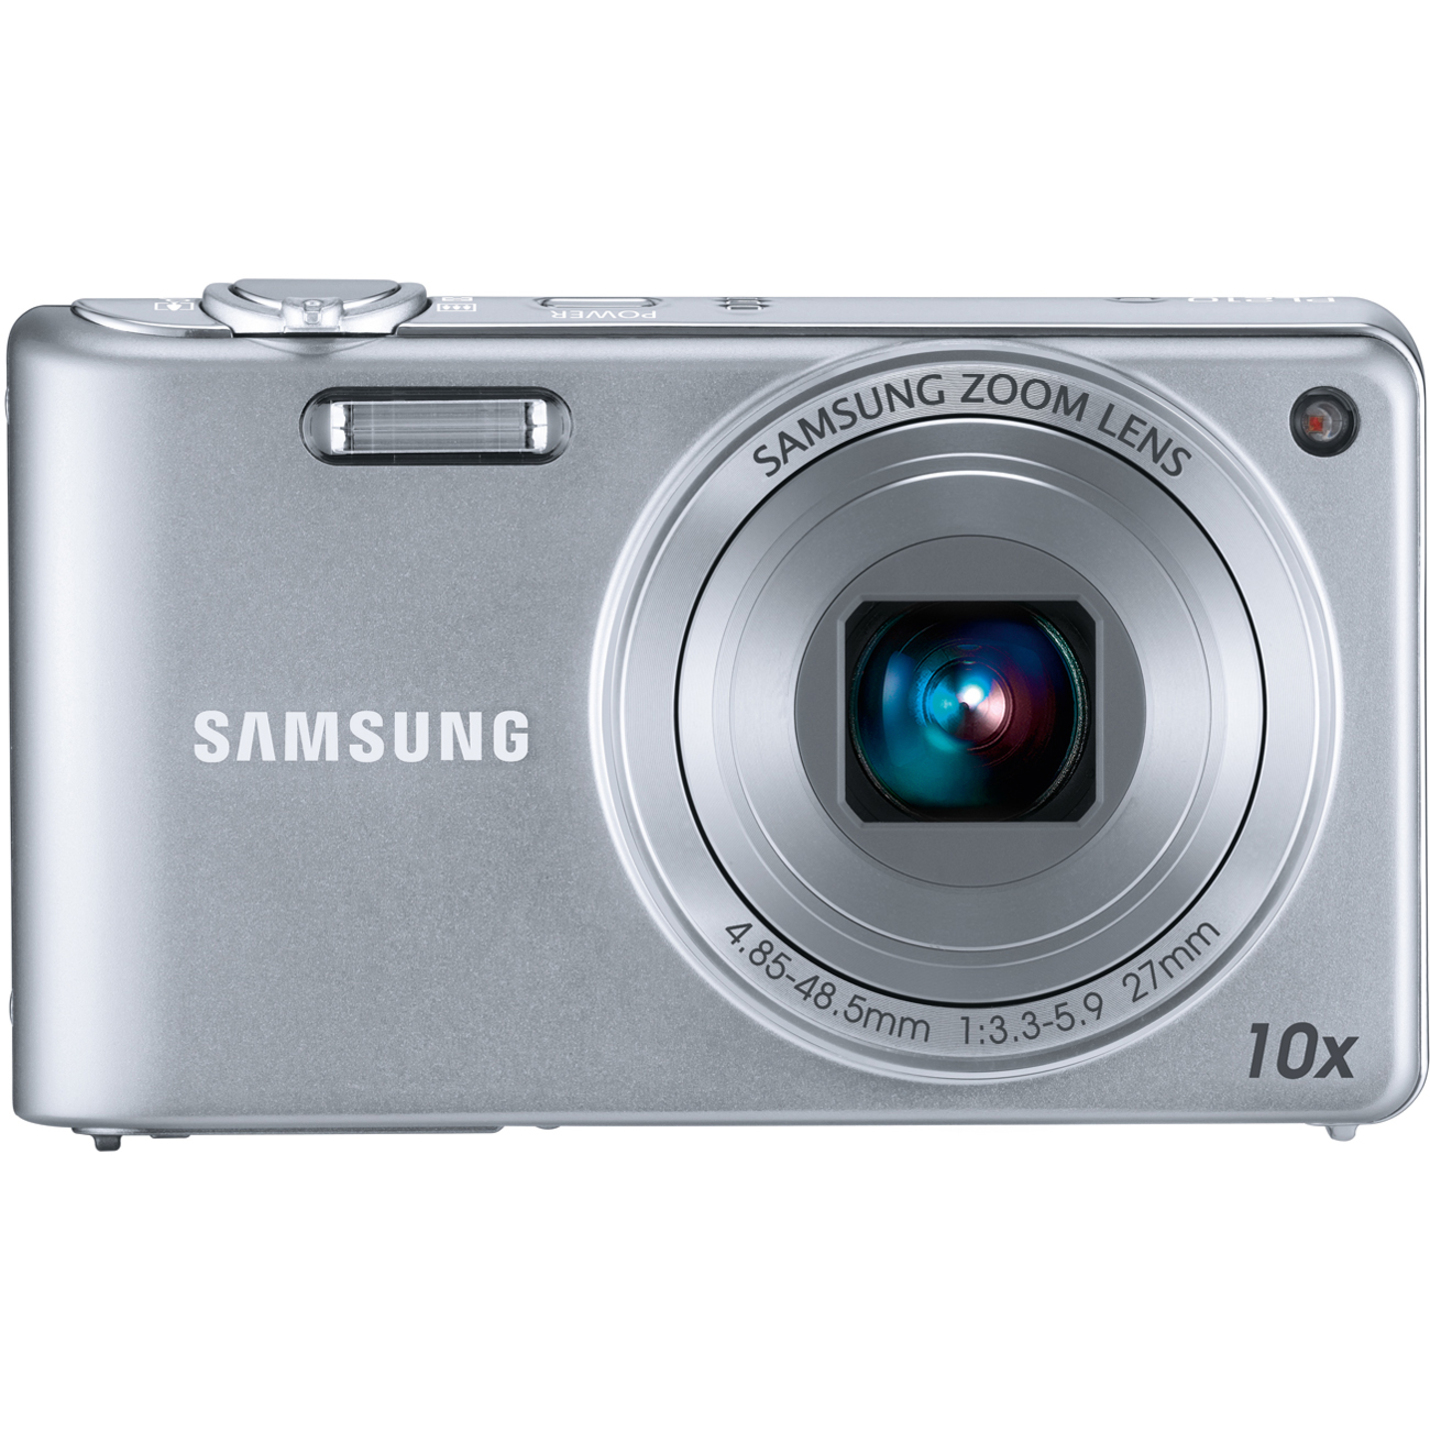 Samsung PL210 14.2 Megapixel Compact Camera, Silver - image 1 of 4